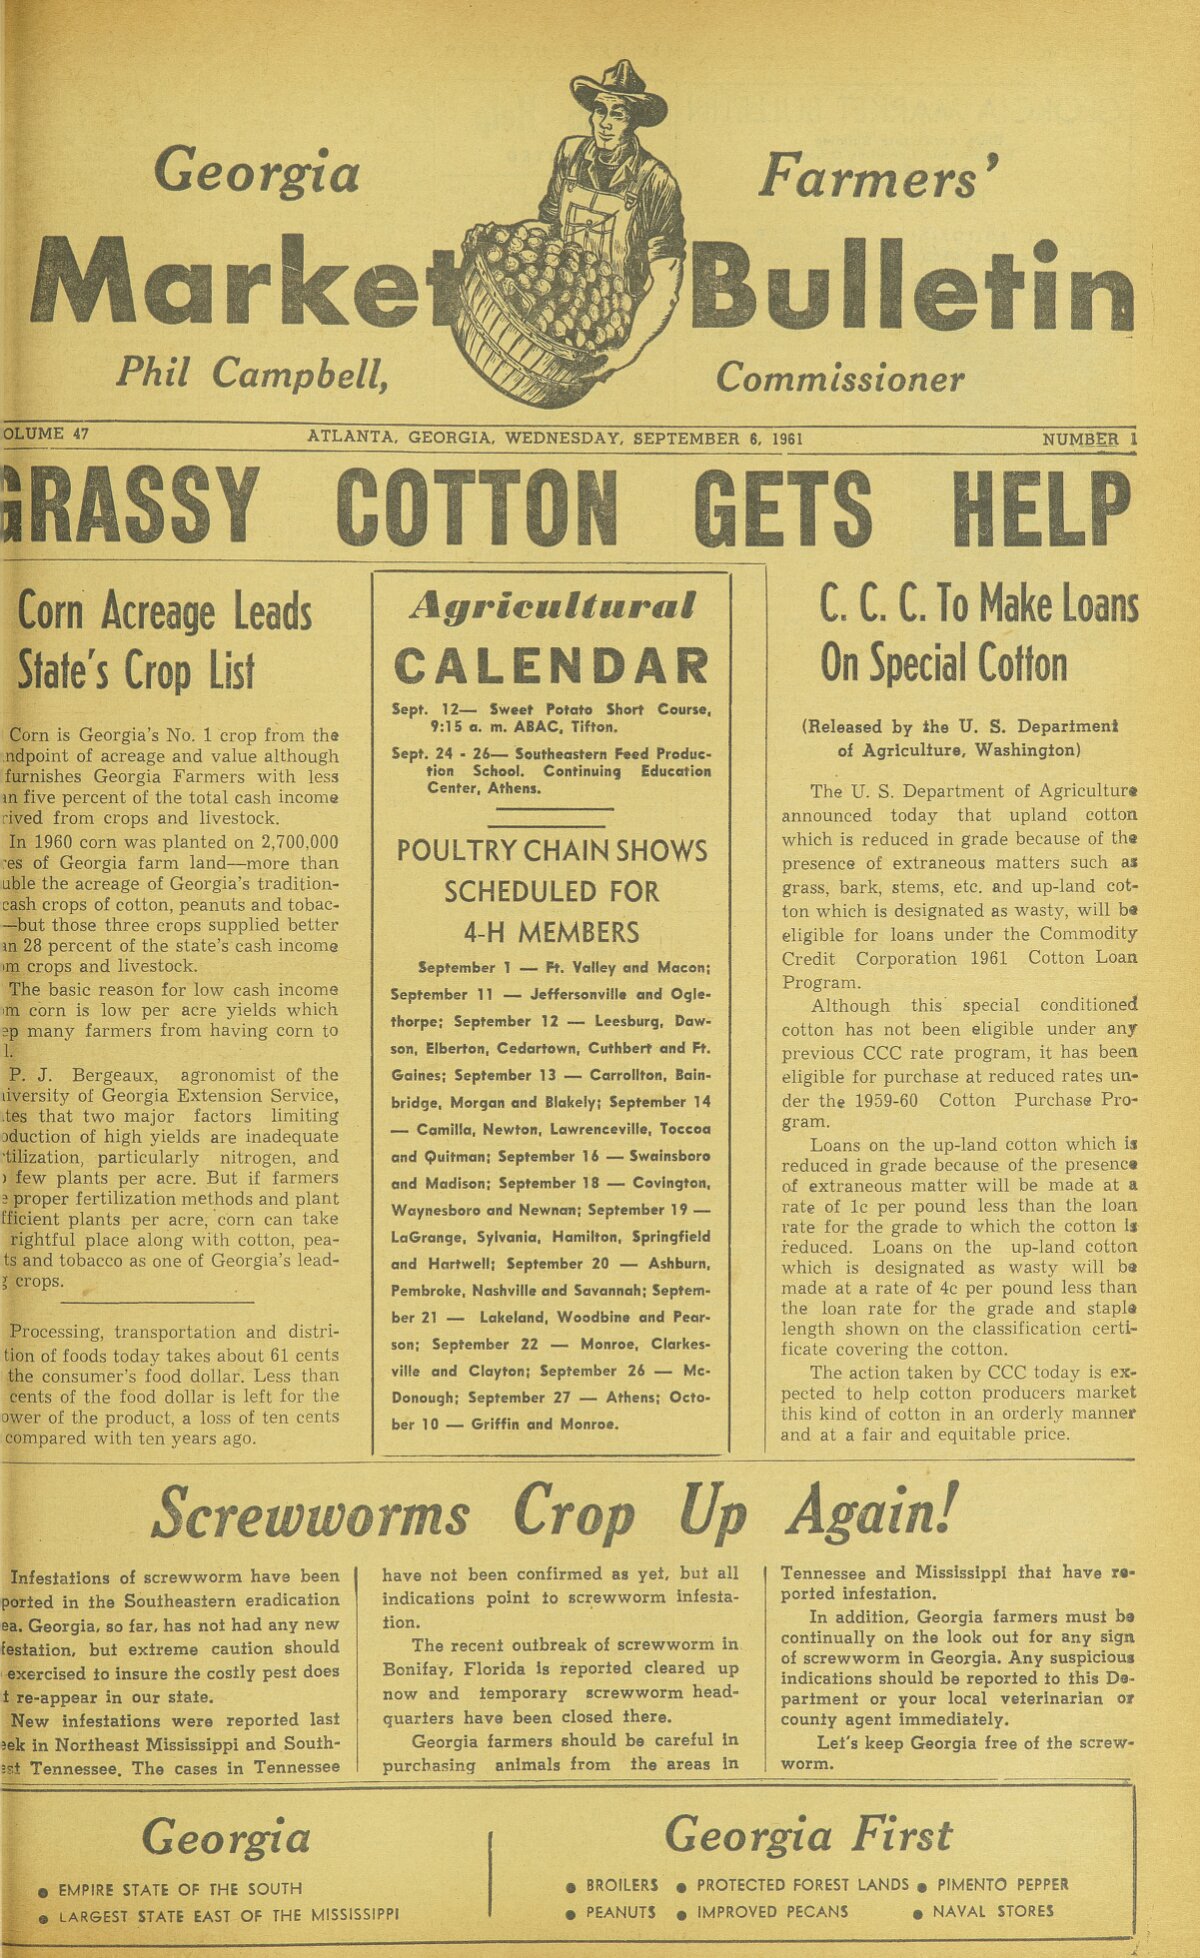 Farmers and consumers market bulletin, 1961 September 6 image